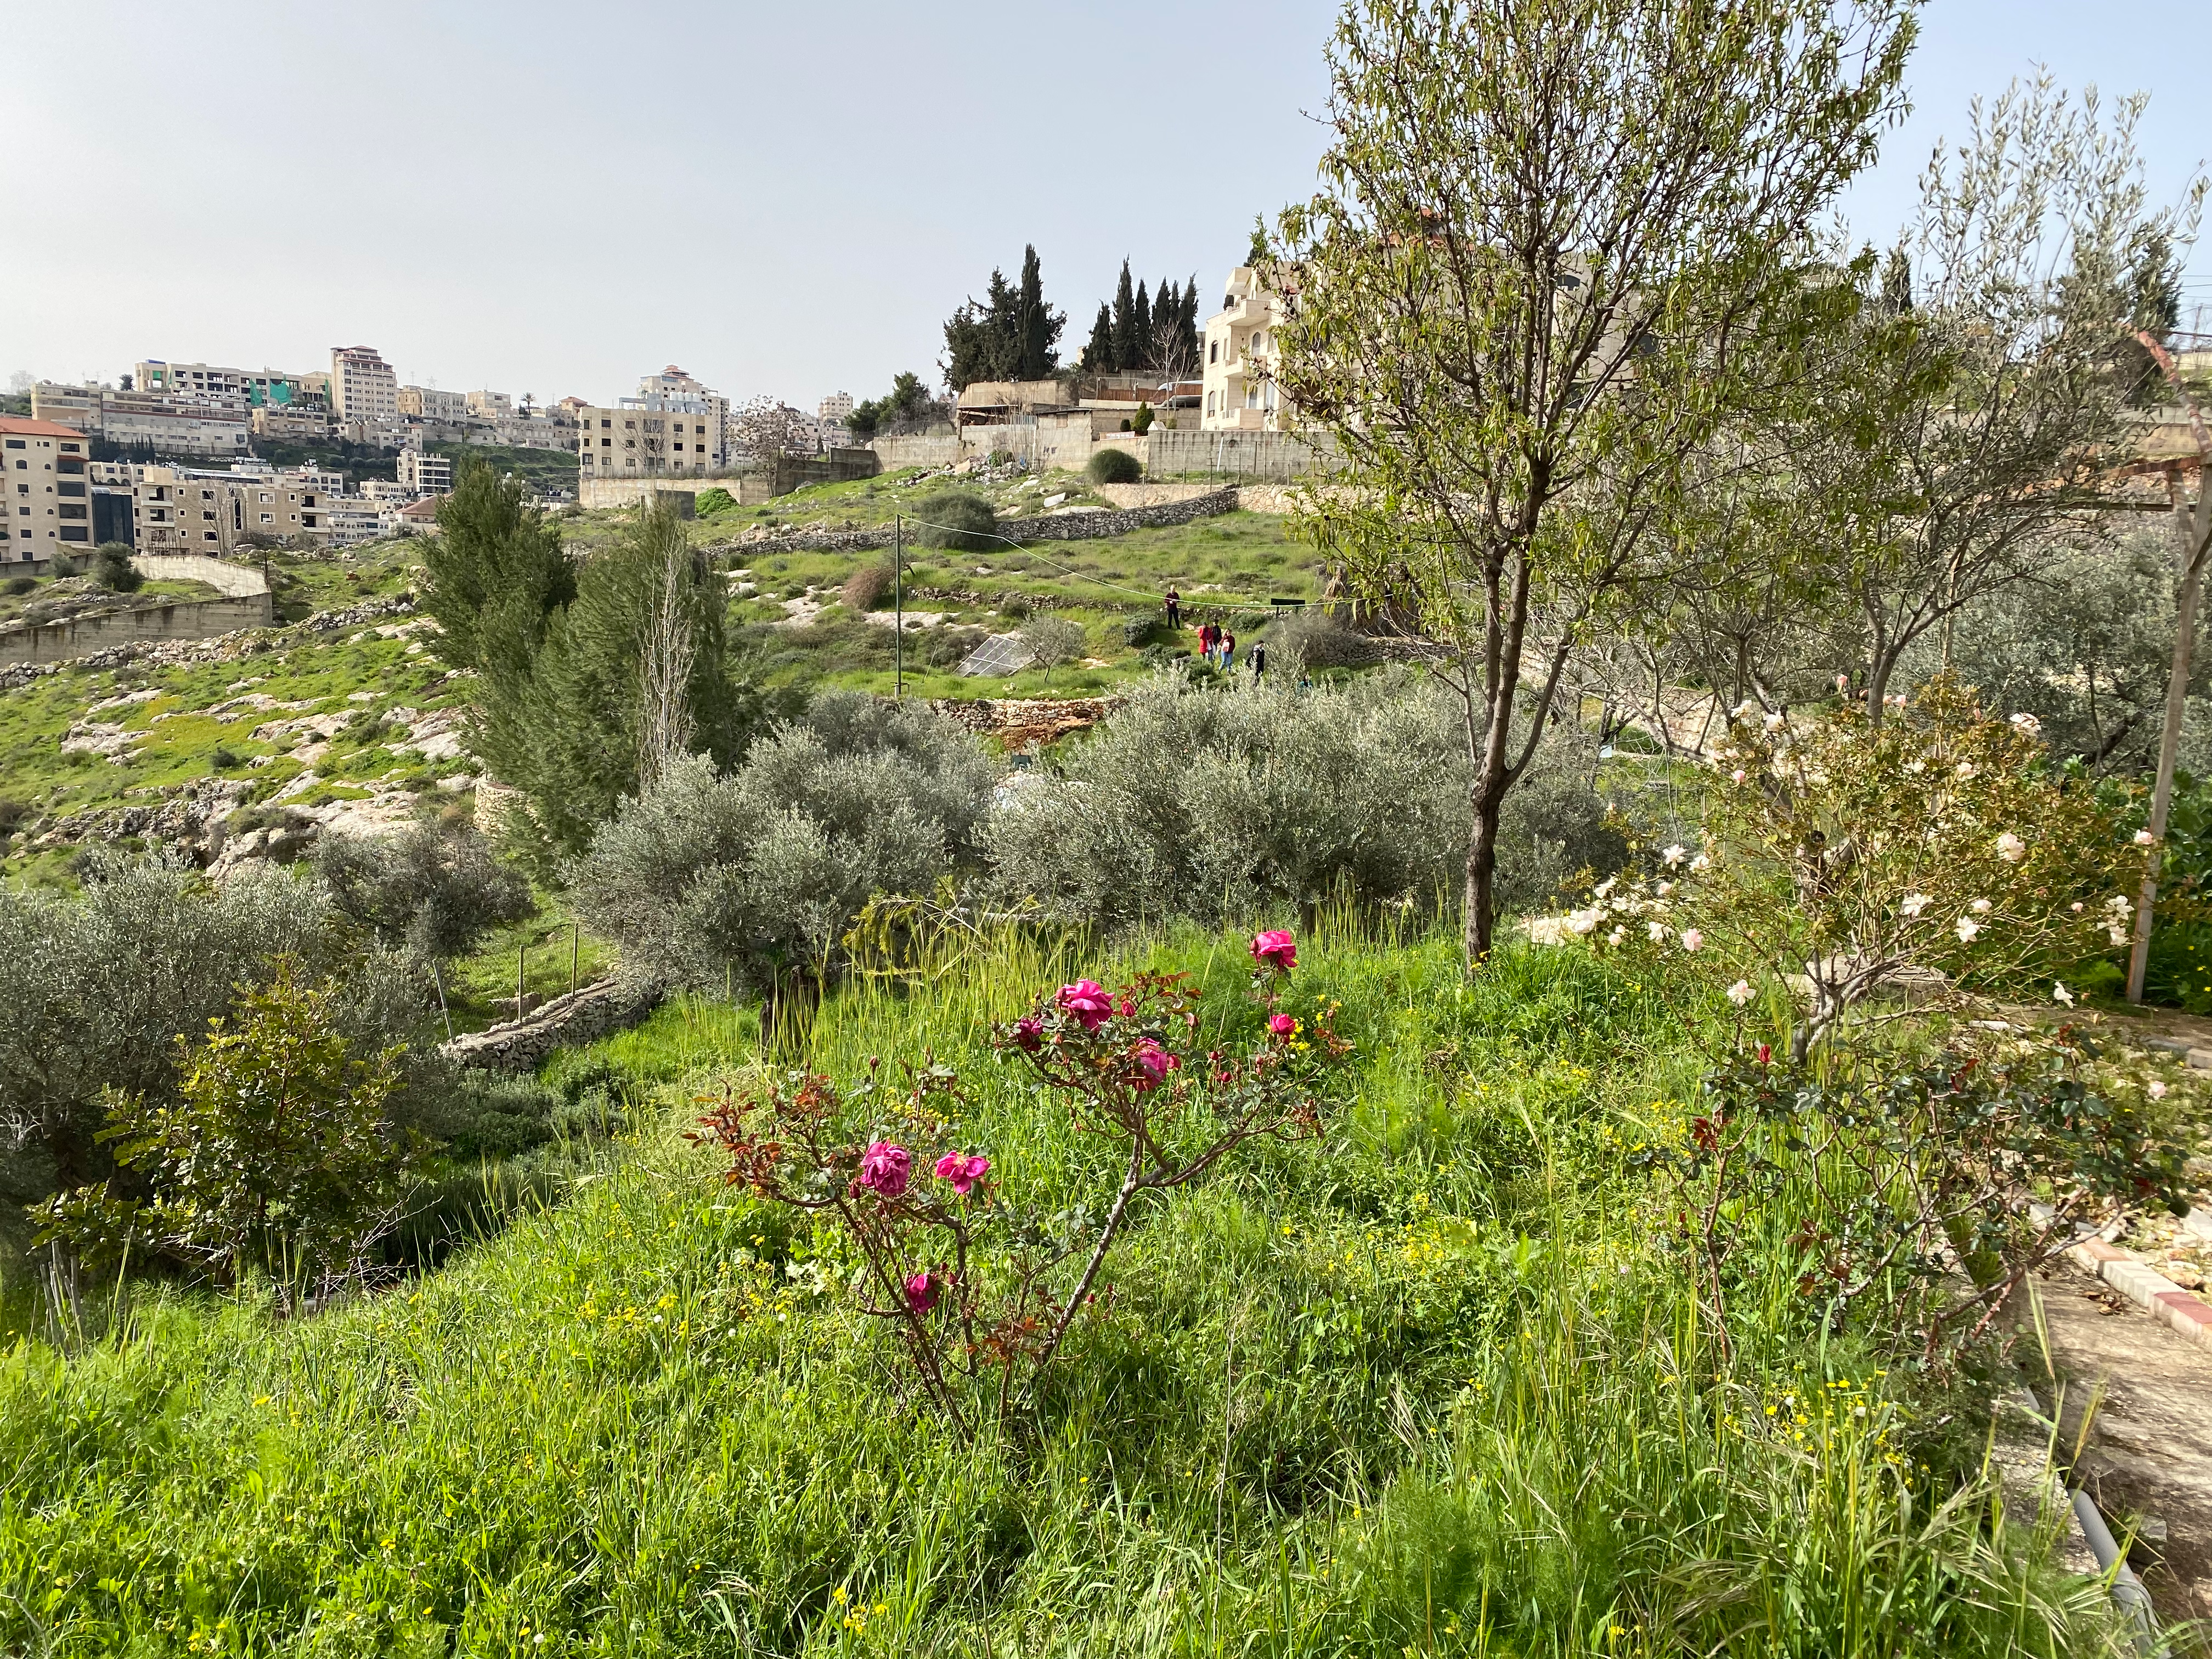 A landscape view of plants from a hilltop, walls and buildings in the distance.